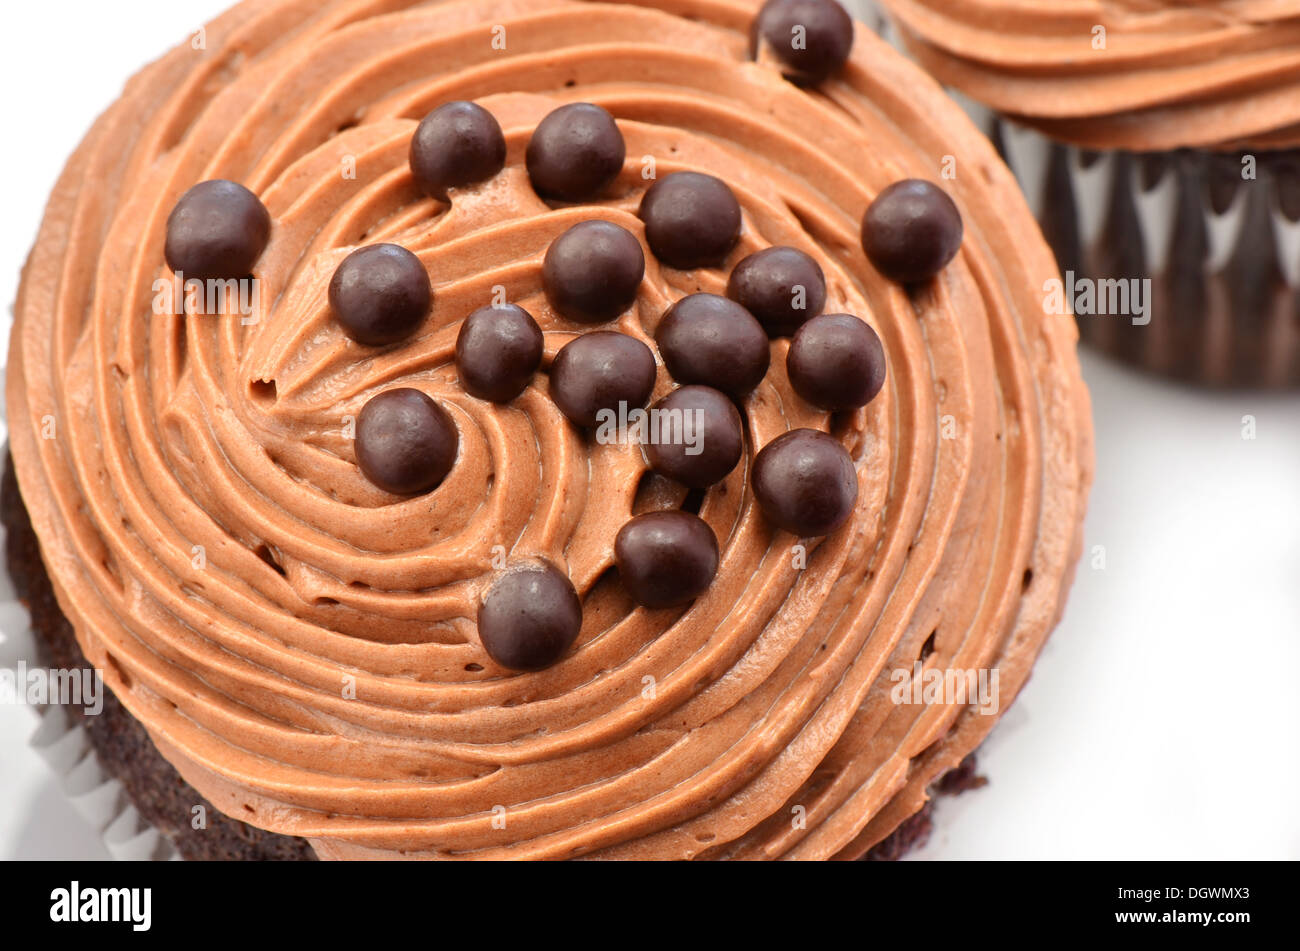 Gourmet chocolate cupcakes with chocolate chiffon icing and chocolate balls from an overhead position Stock Photo